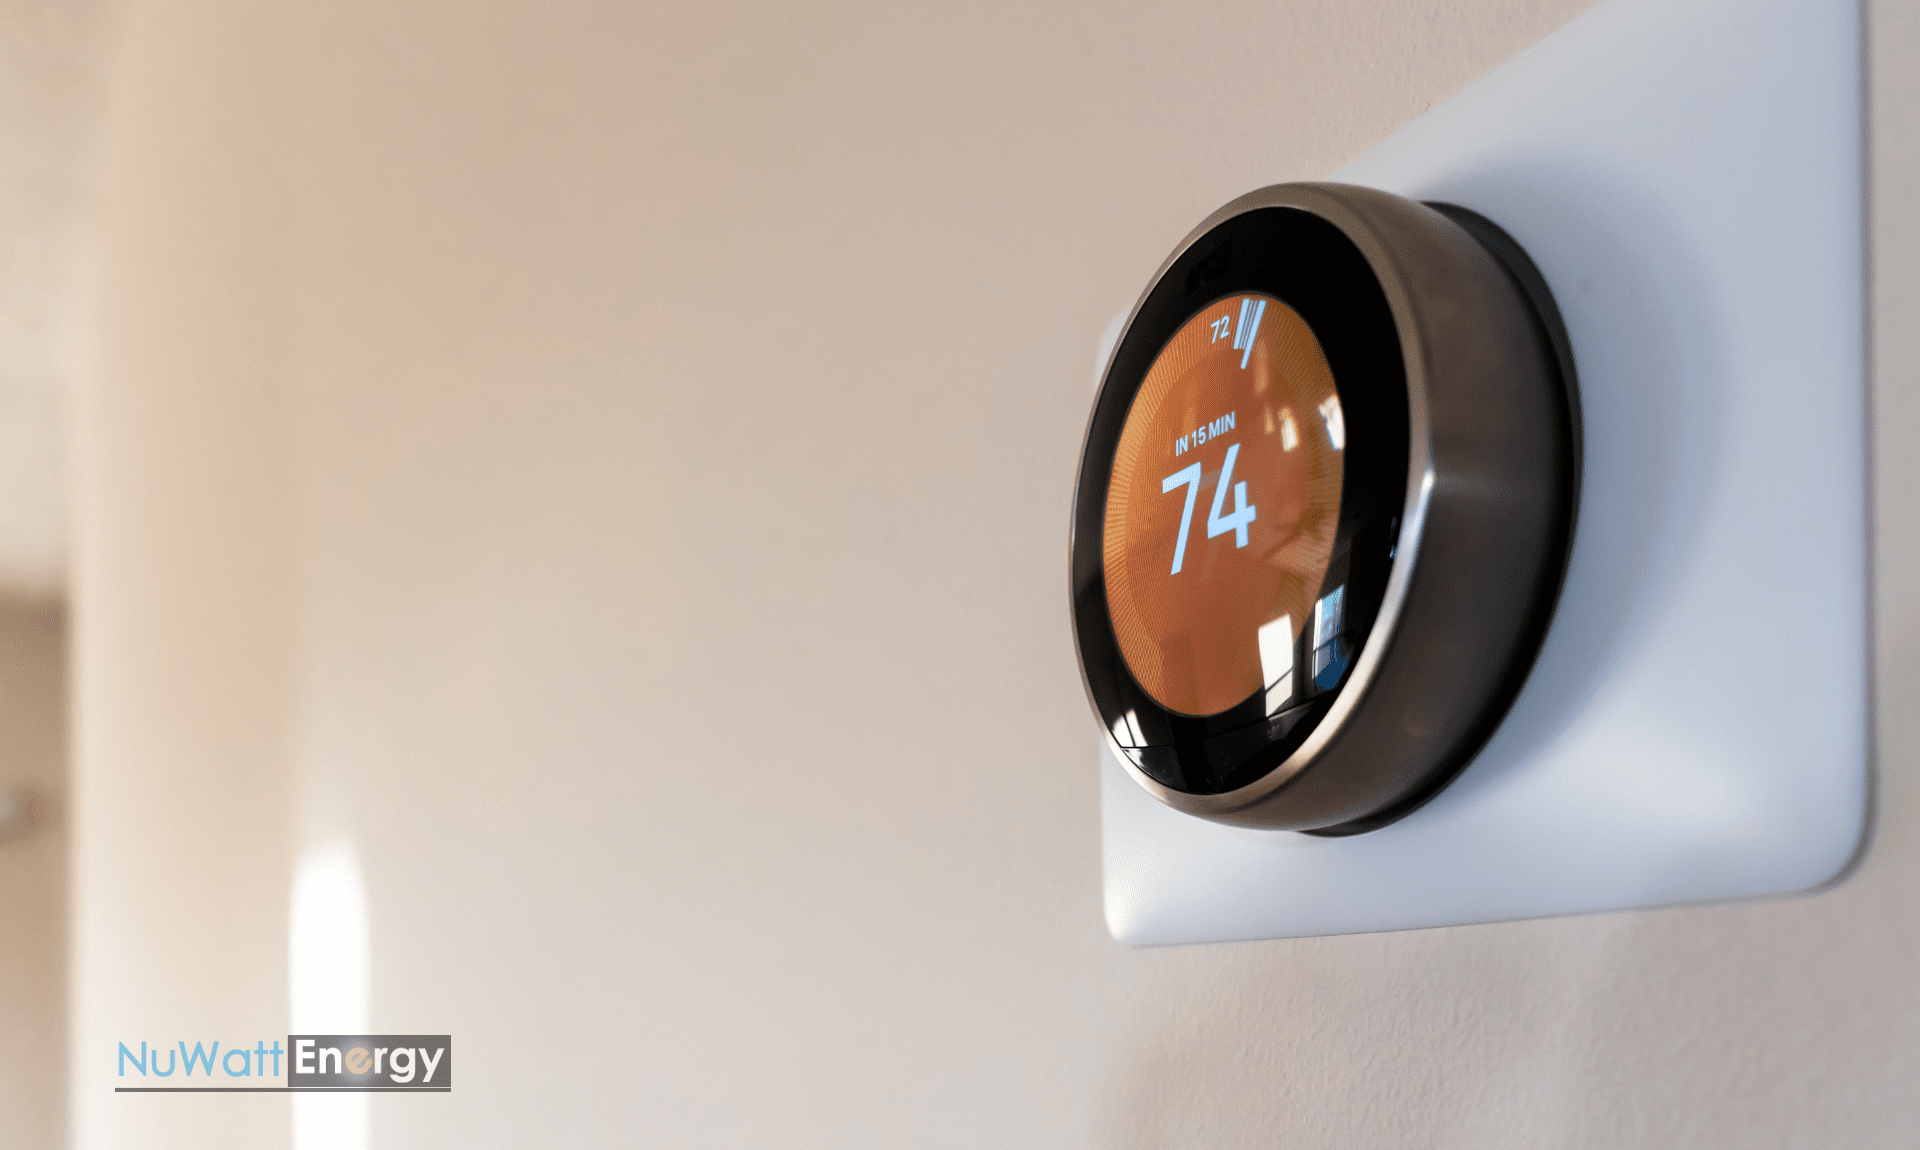 Smart thermostat in new home. / via Getty Images